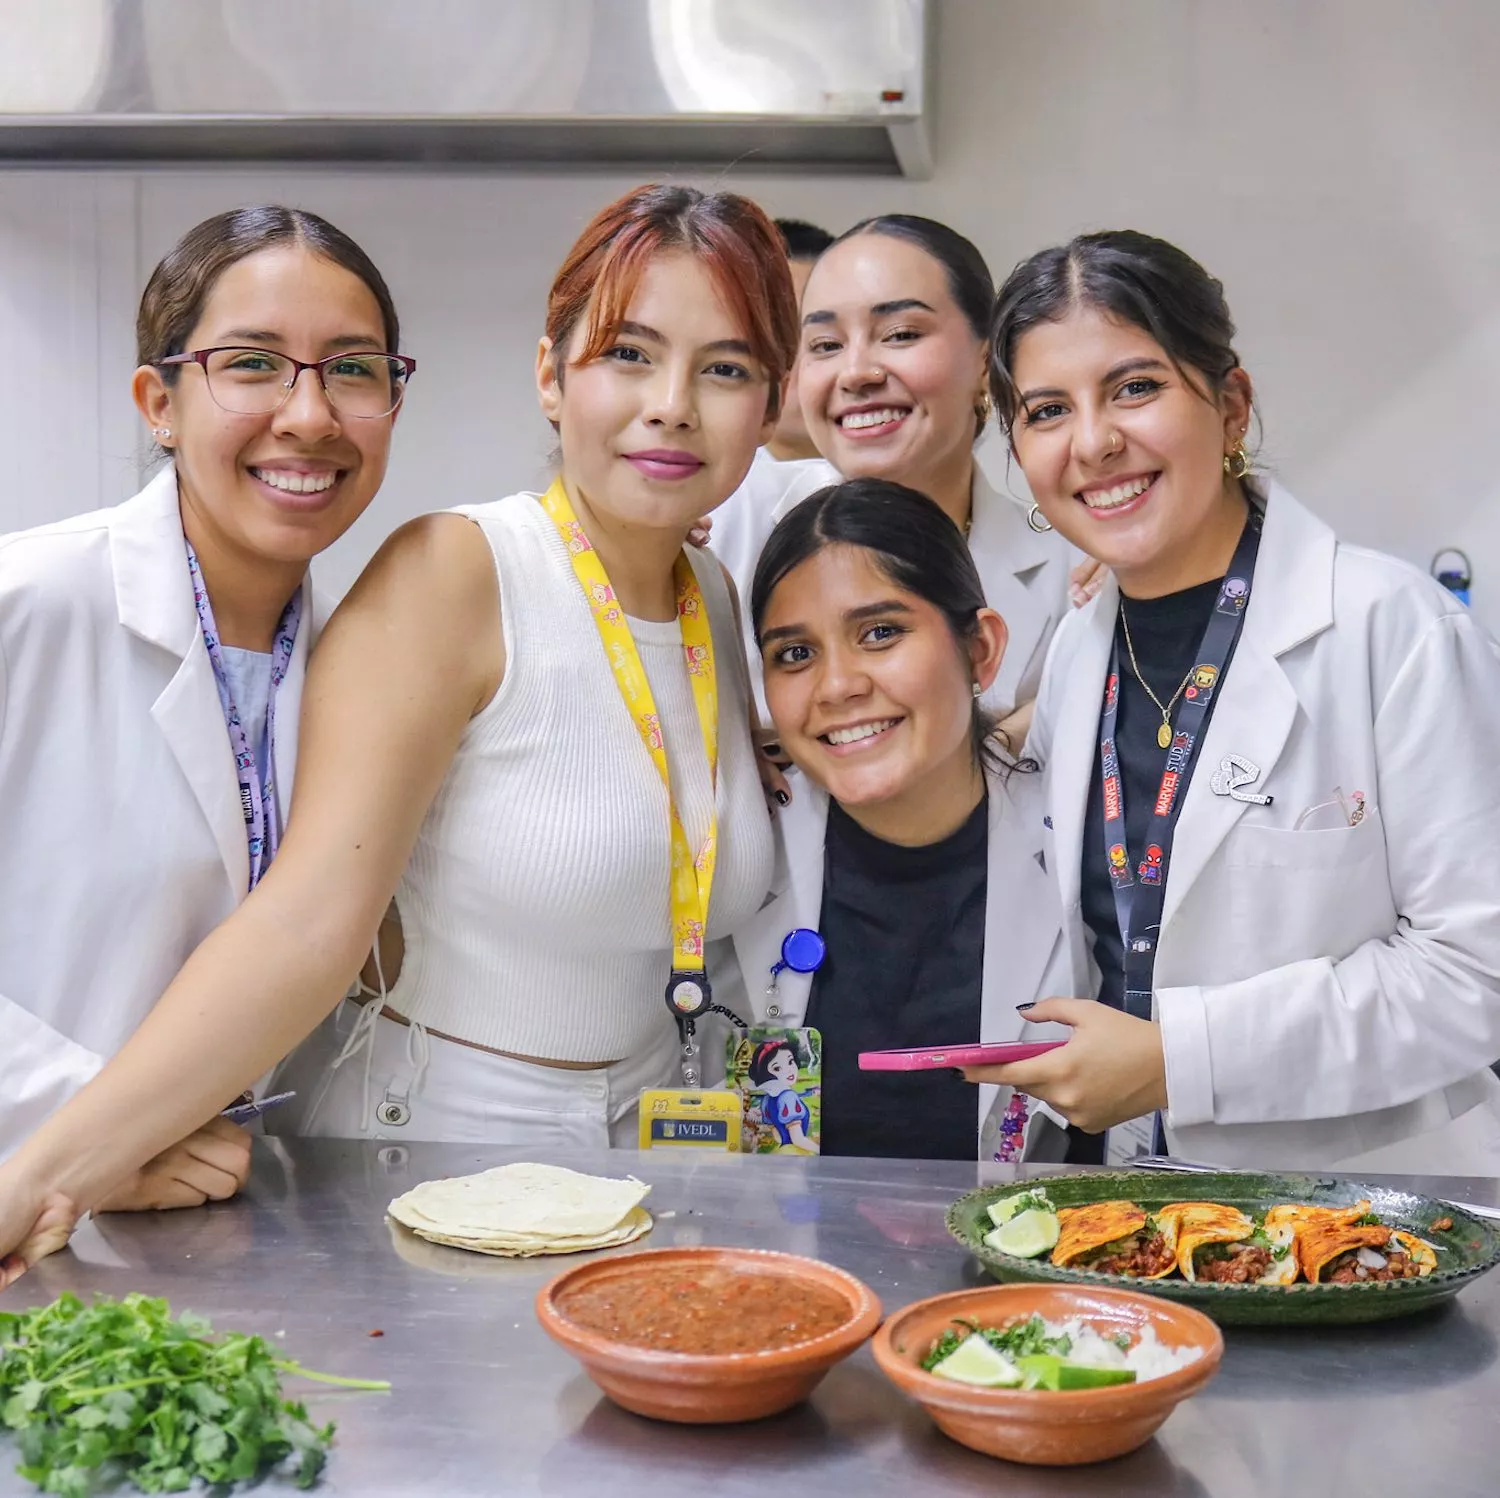 Plant-based workshop by Love Veg in Mexico